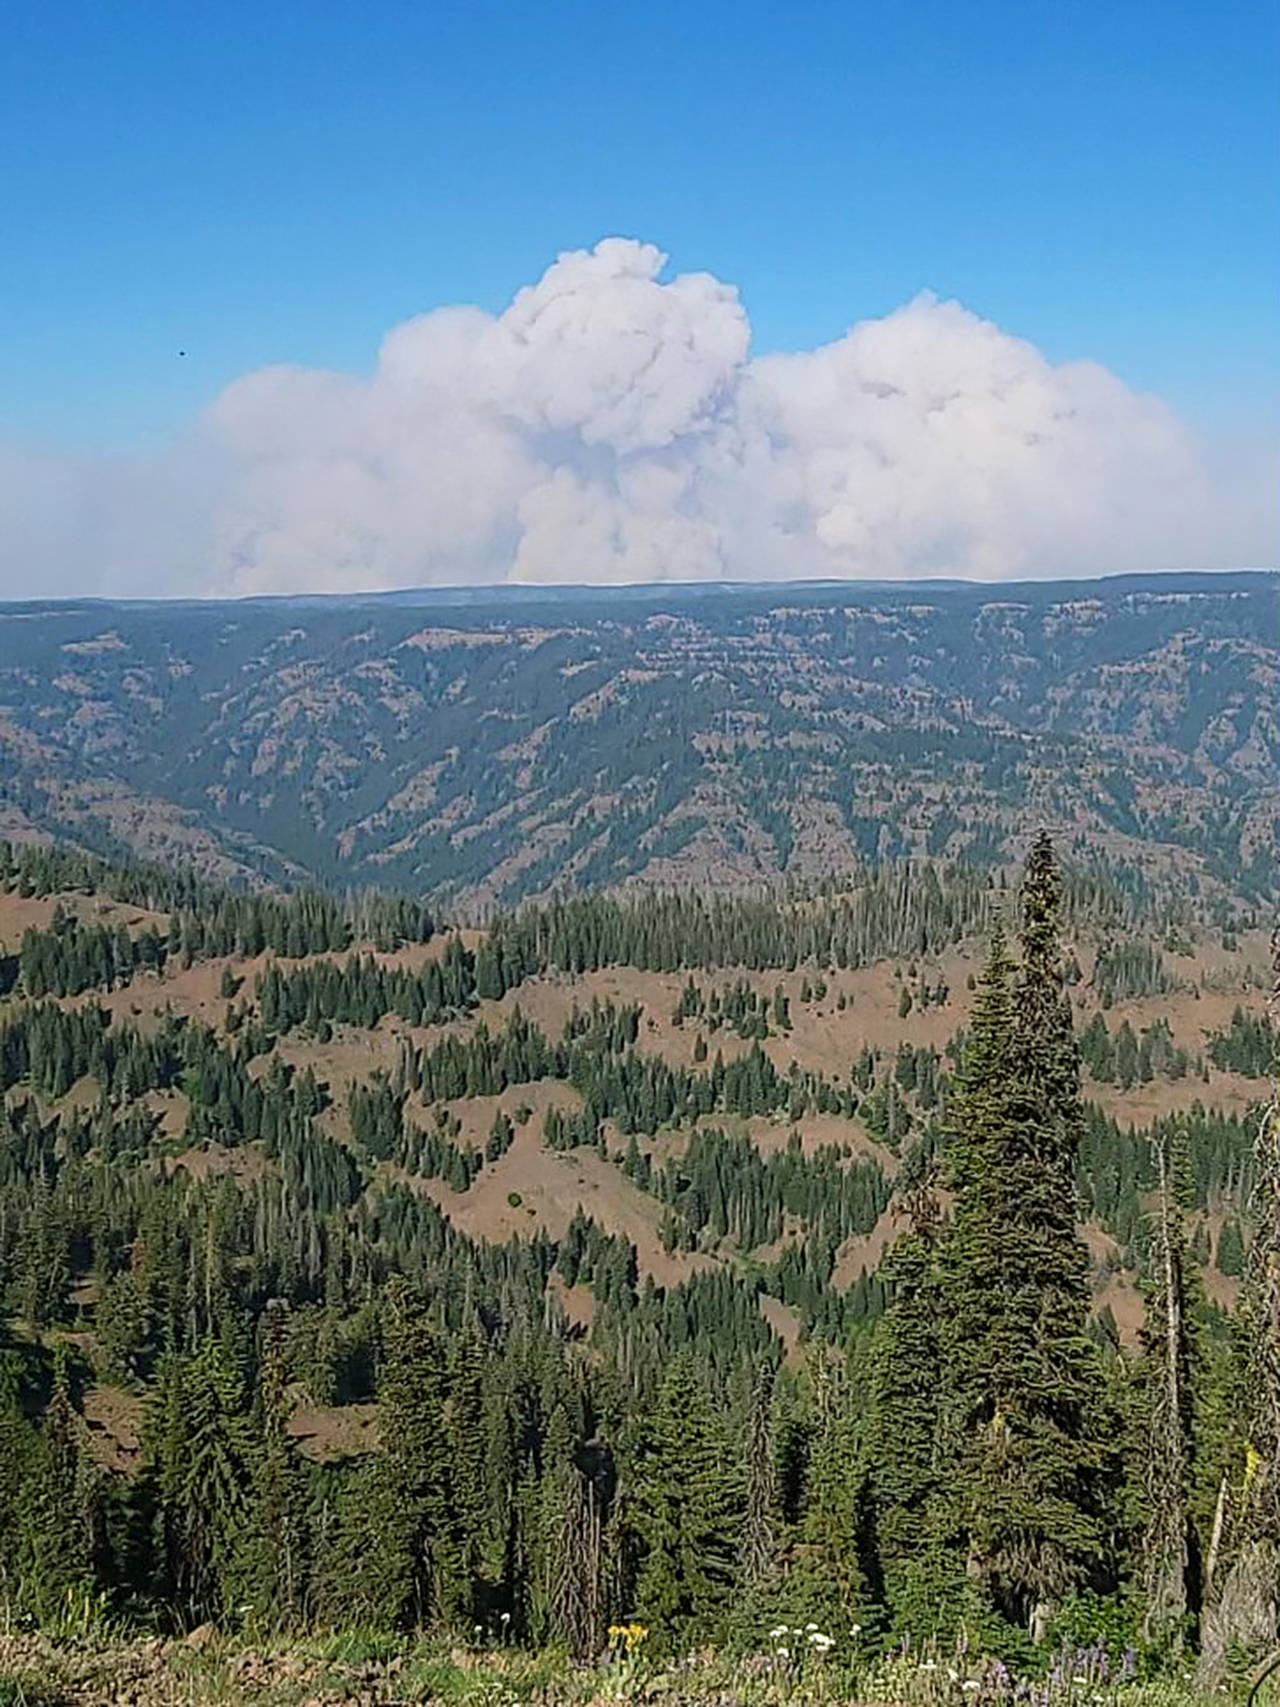 About 46,352 acres has burned in the Dry Gulch Fire in southeast Washington as of July 11. (InciWeb)